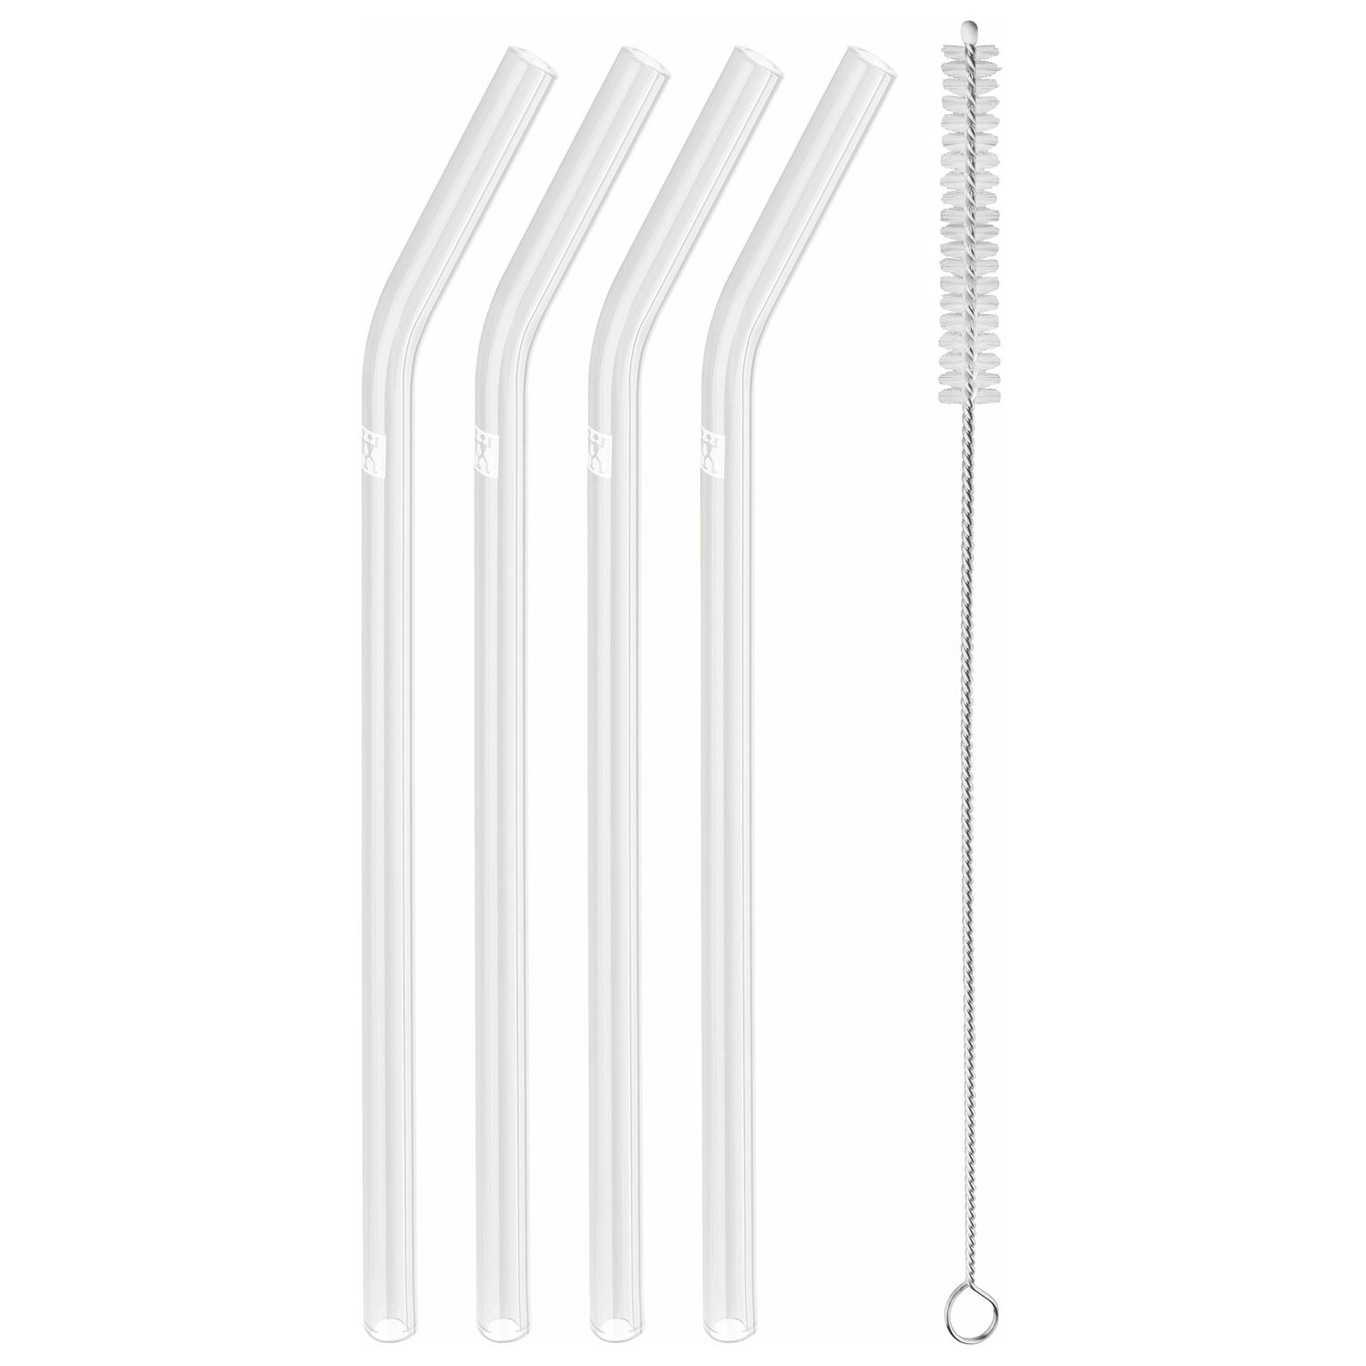 Orrefors Stainless Steel Straws with Cleaner